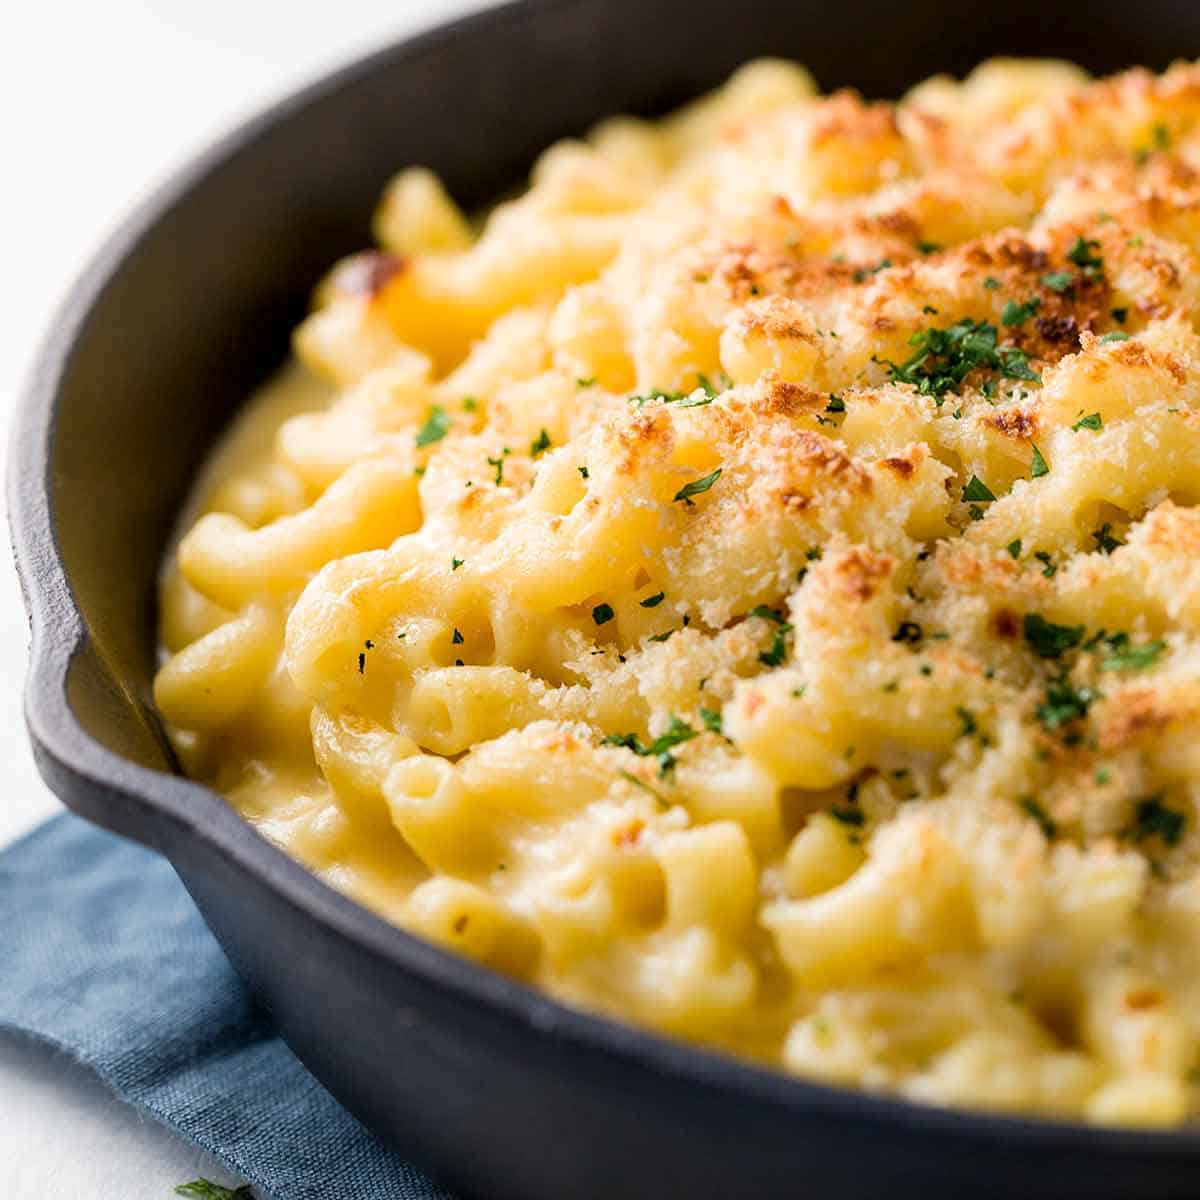 Recipes For Baked Mac And Cheese With Bread Crumbs
 Baked Macaroni and Cheese Jessica Gavin